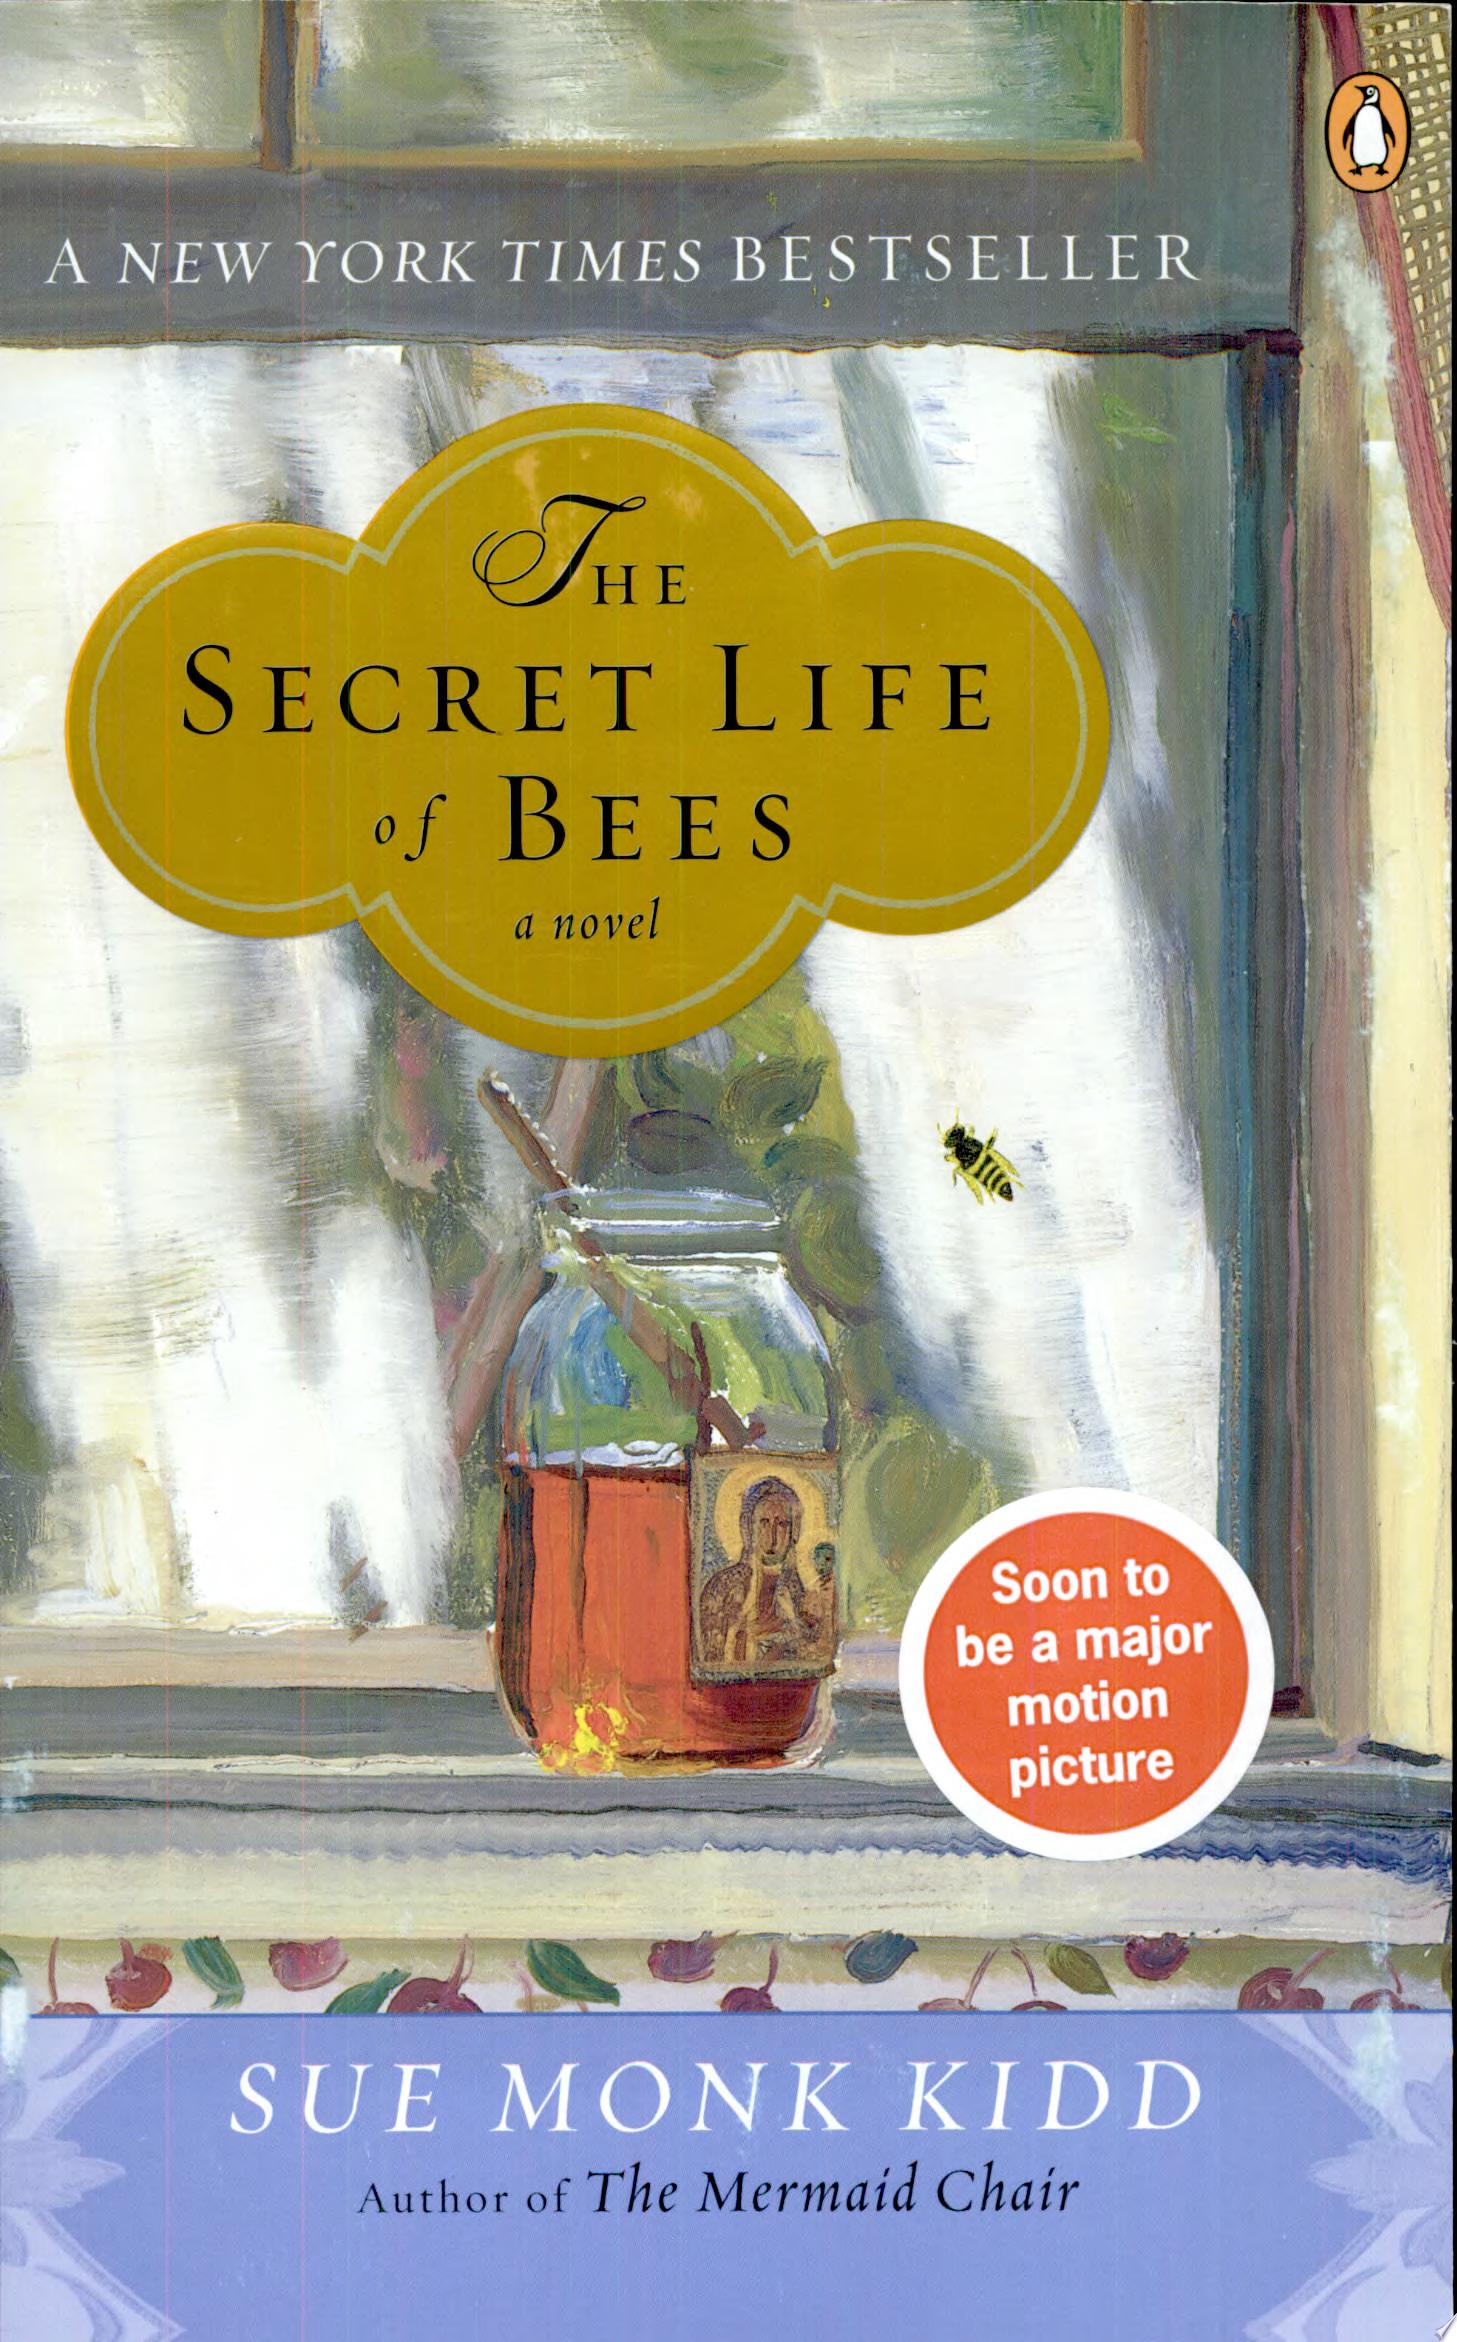 Image for "The Secret Life of Bees"